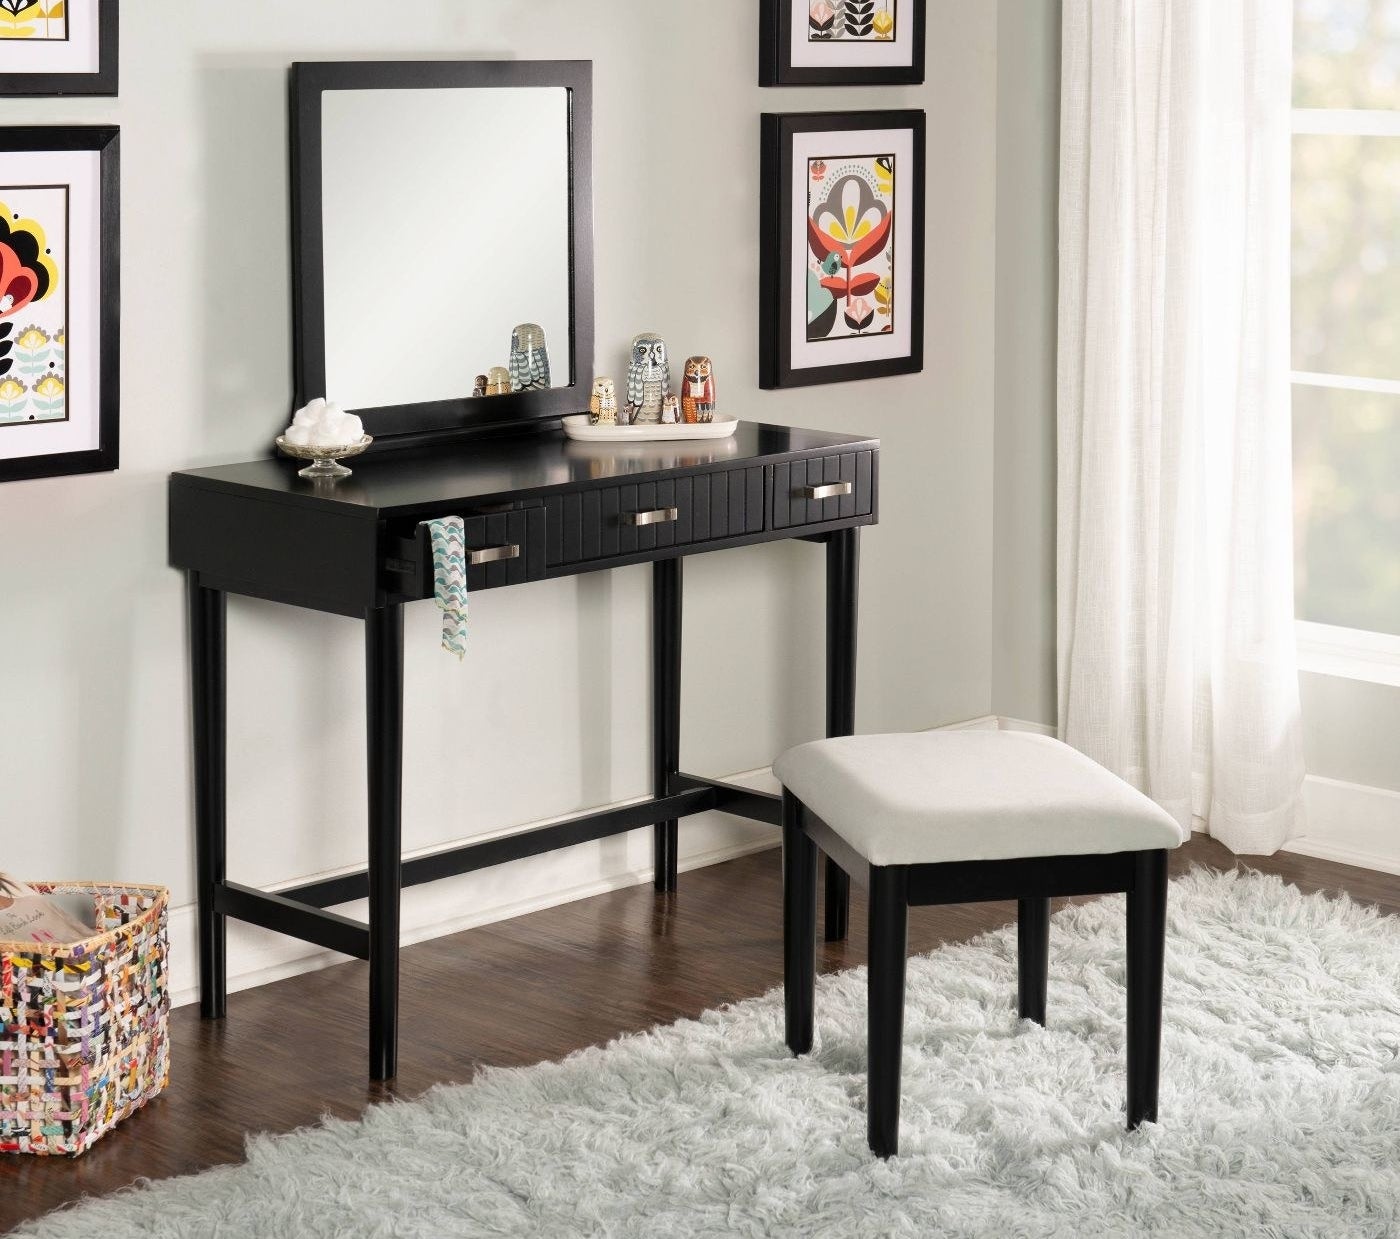 A black vanity with a square mirror and stool